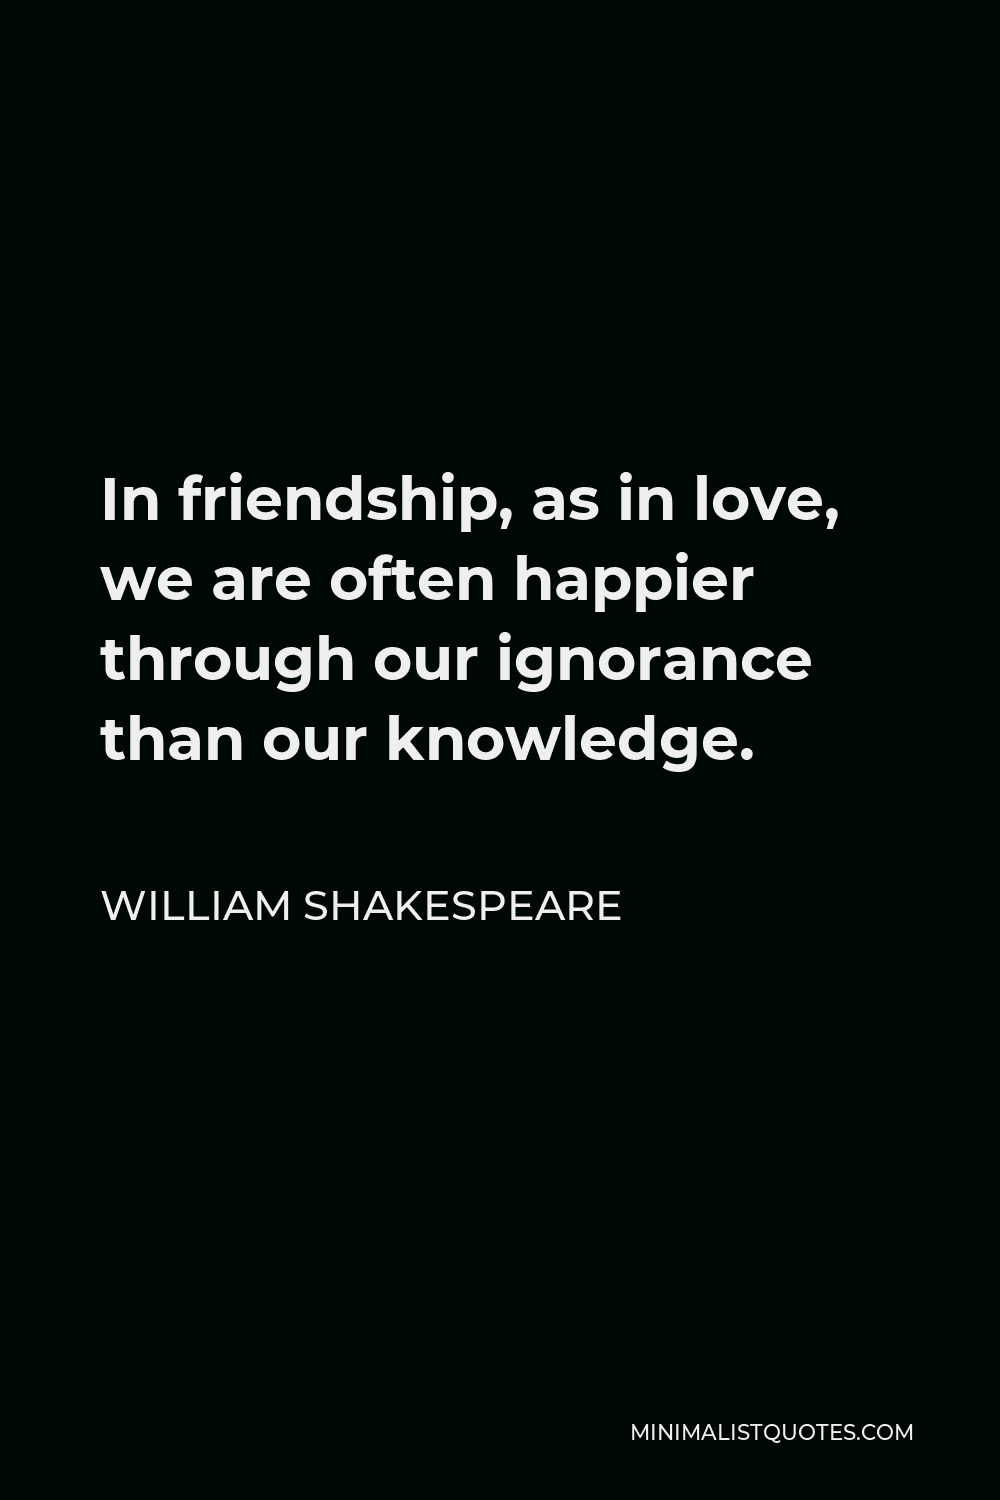 William Shakespeare Quote - In friendship, as in love, we are often happier through our ignorance than our knowledge.